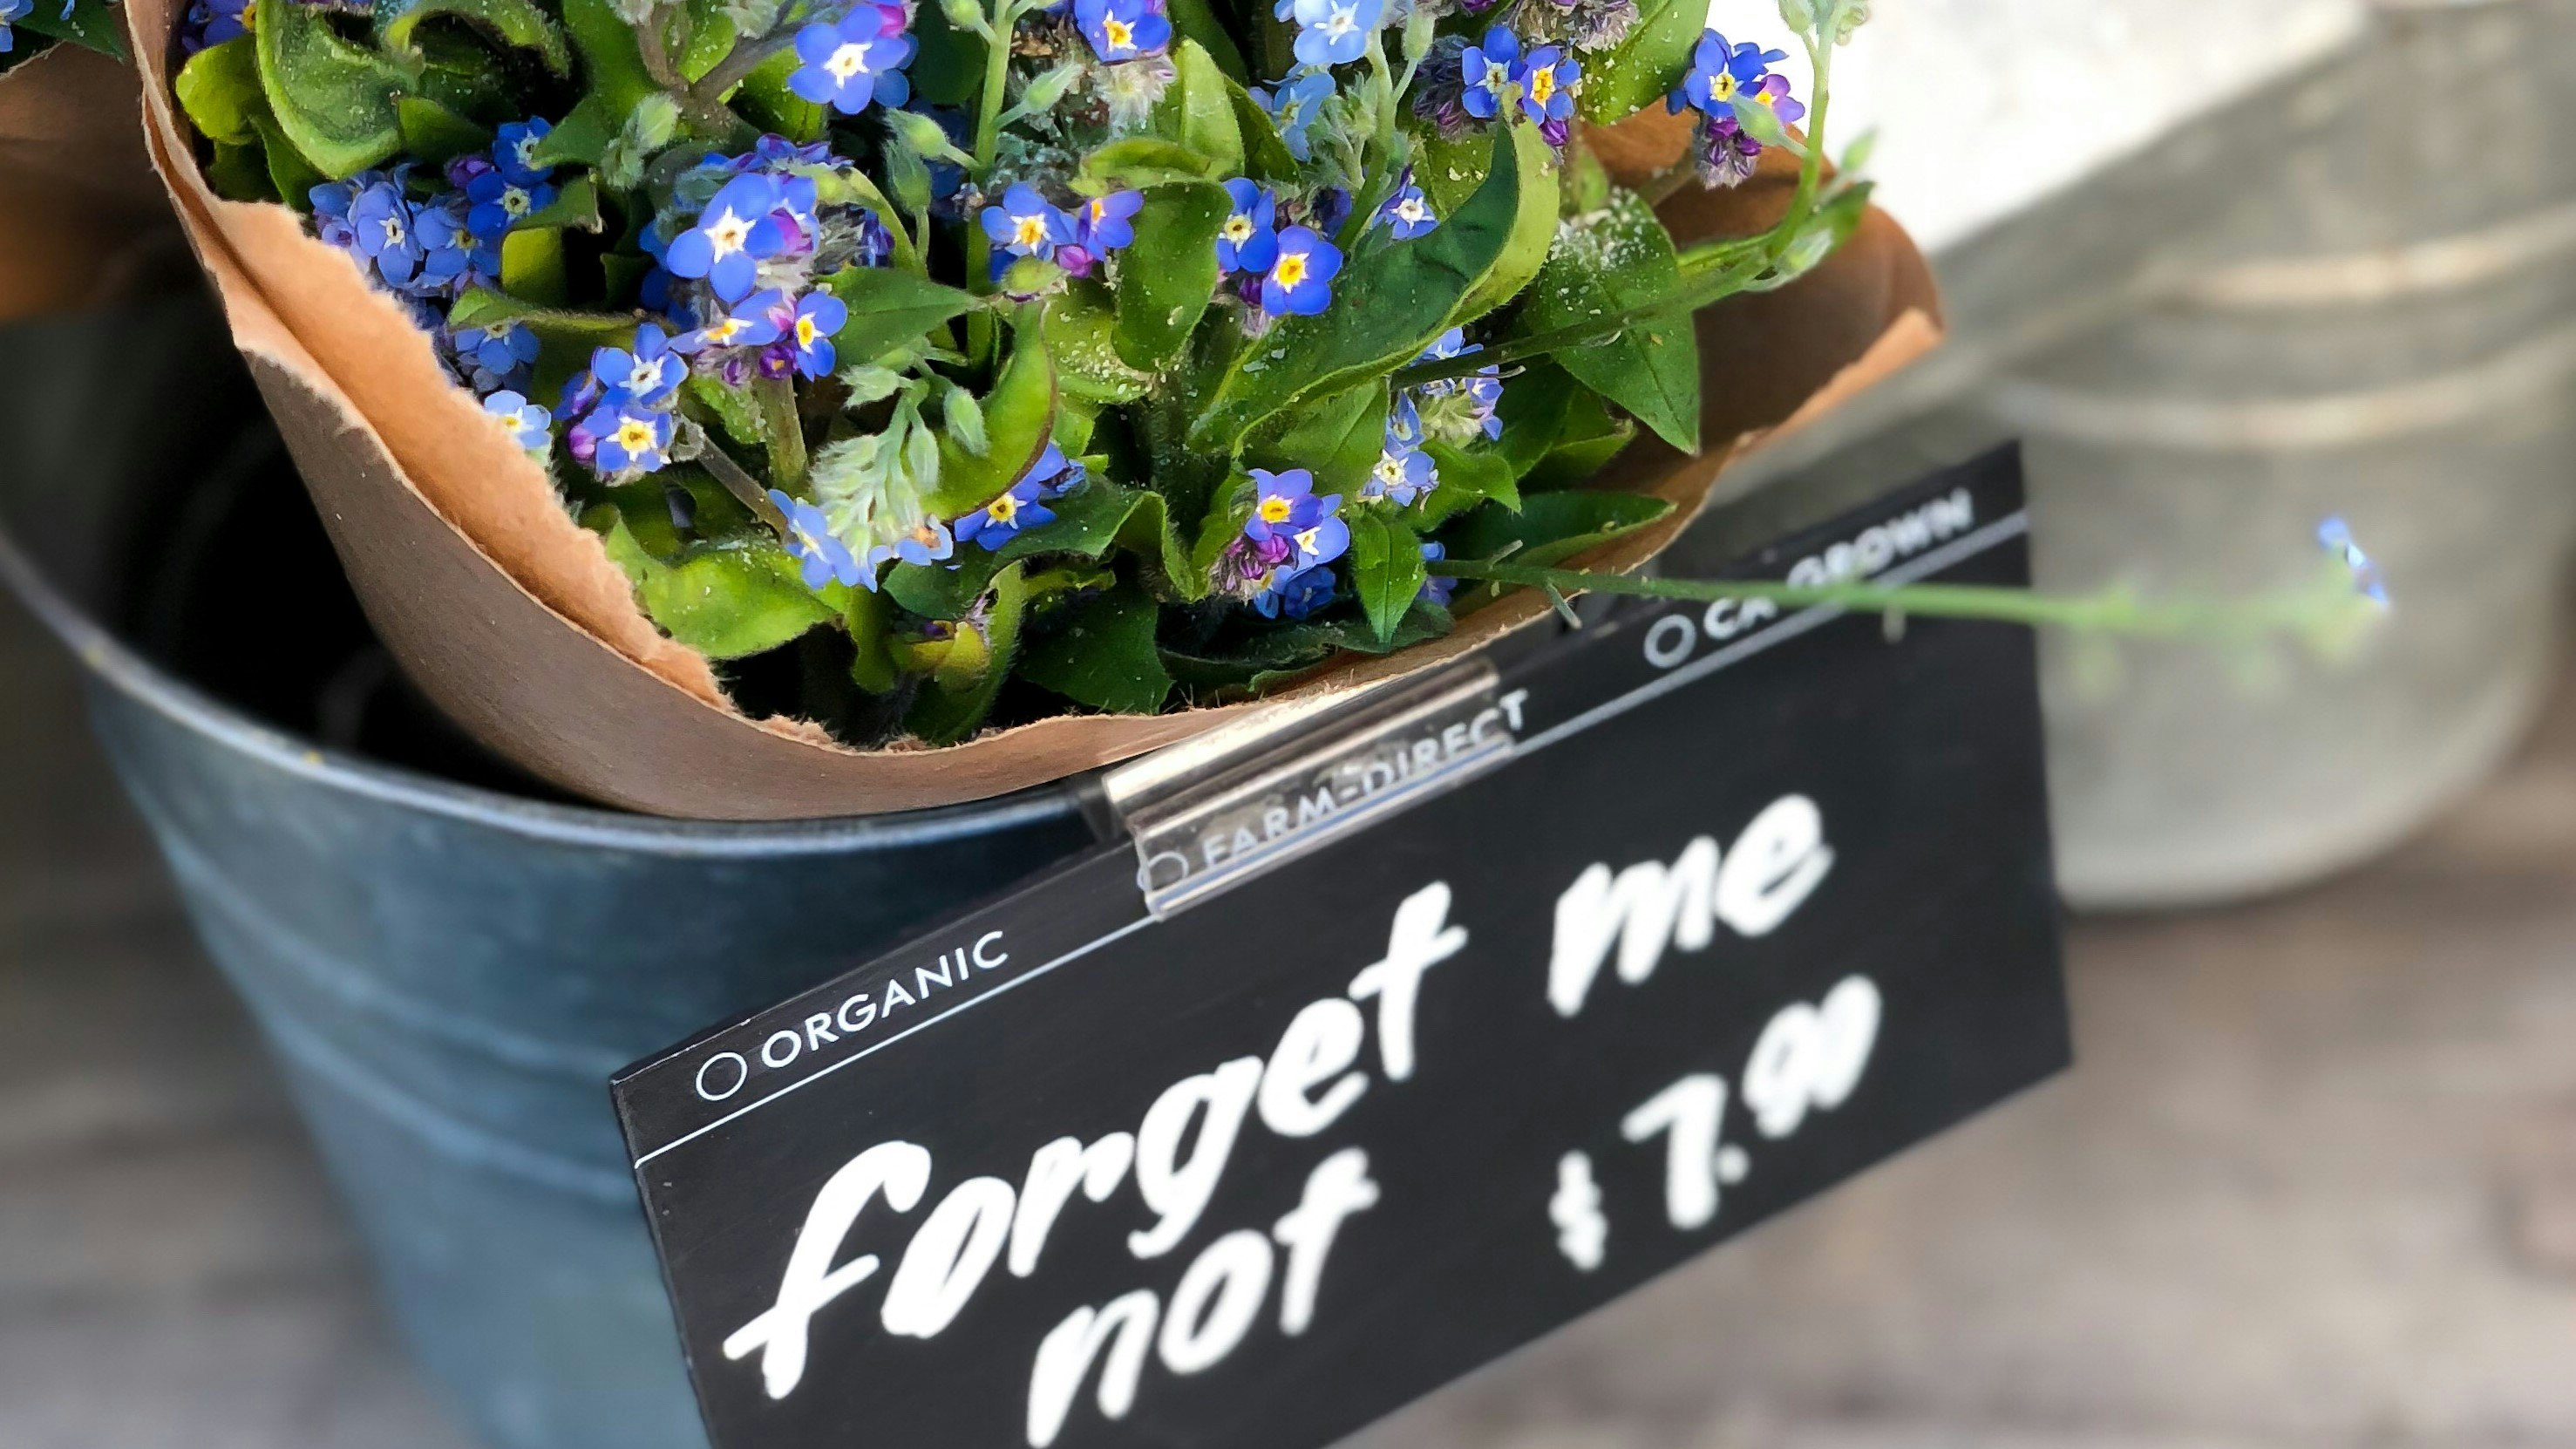 Forget-me-not flowers in a basket